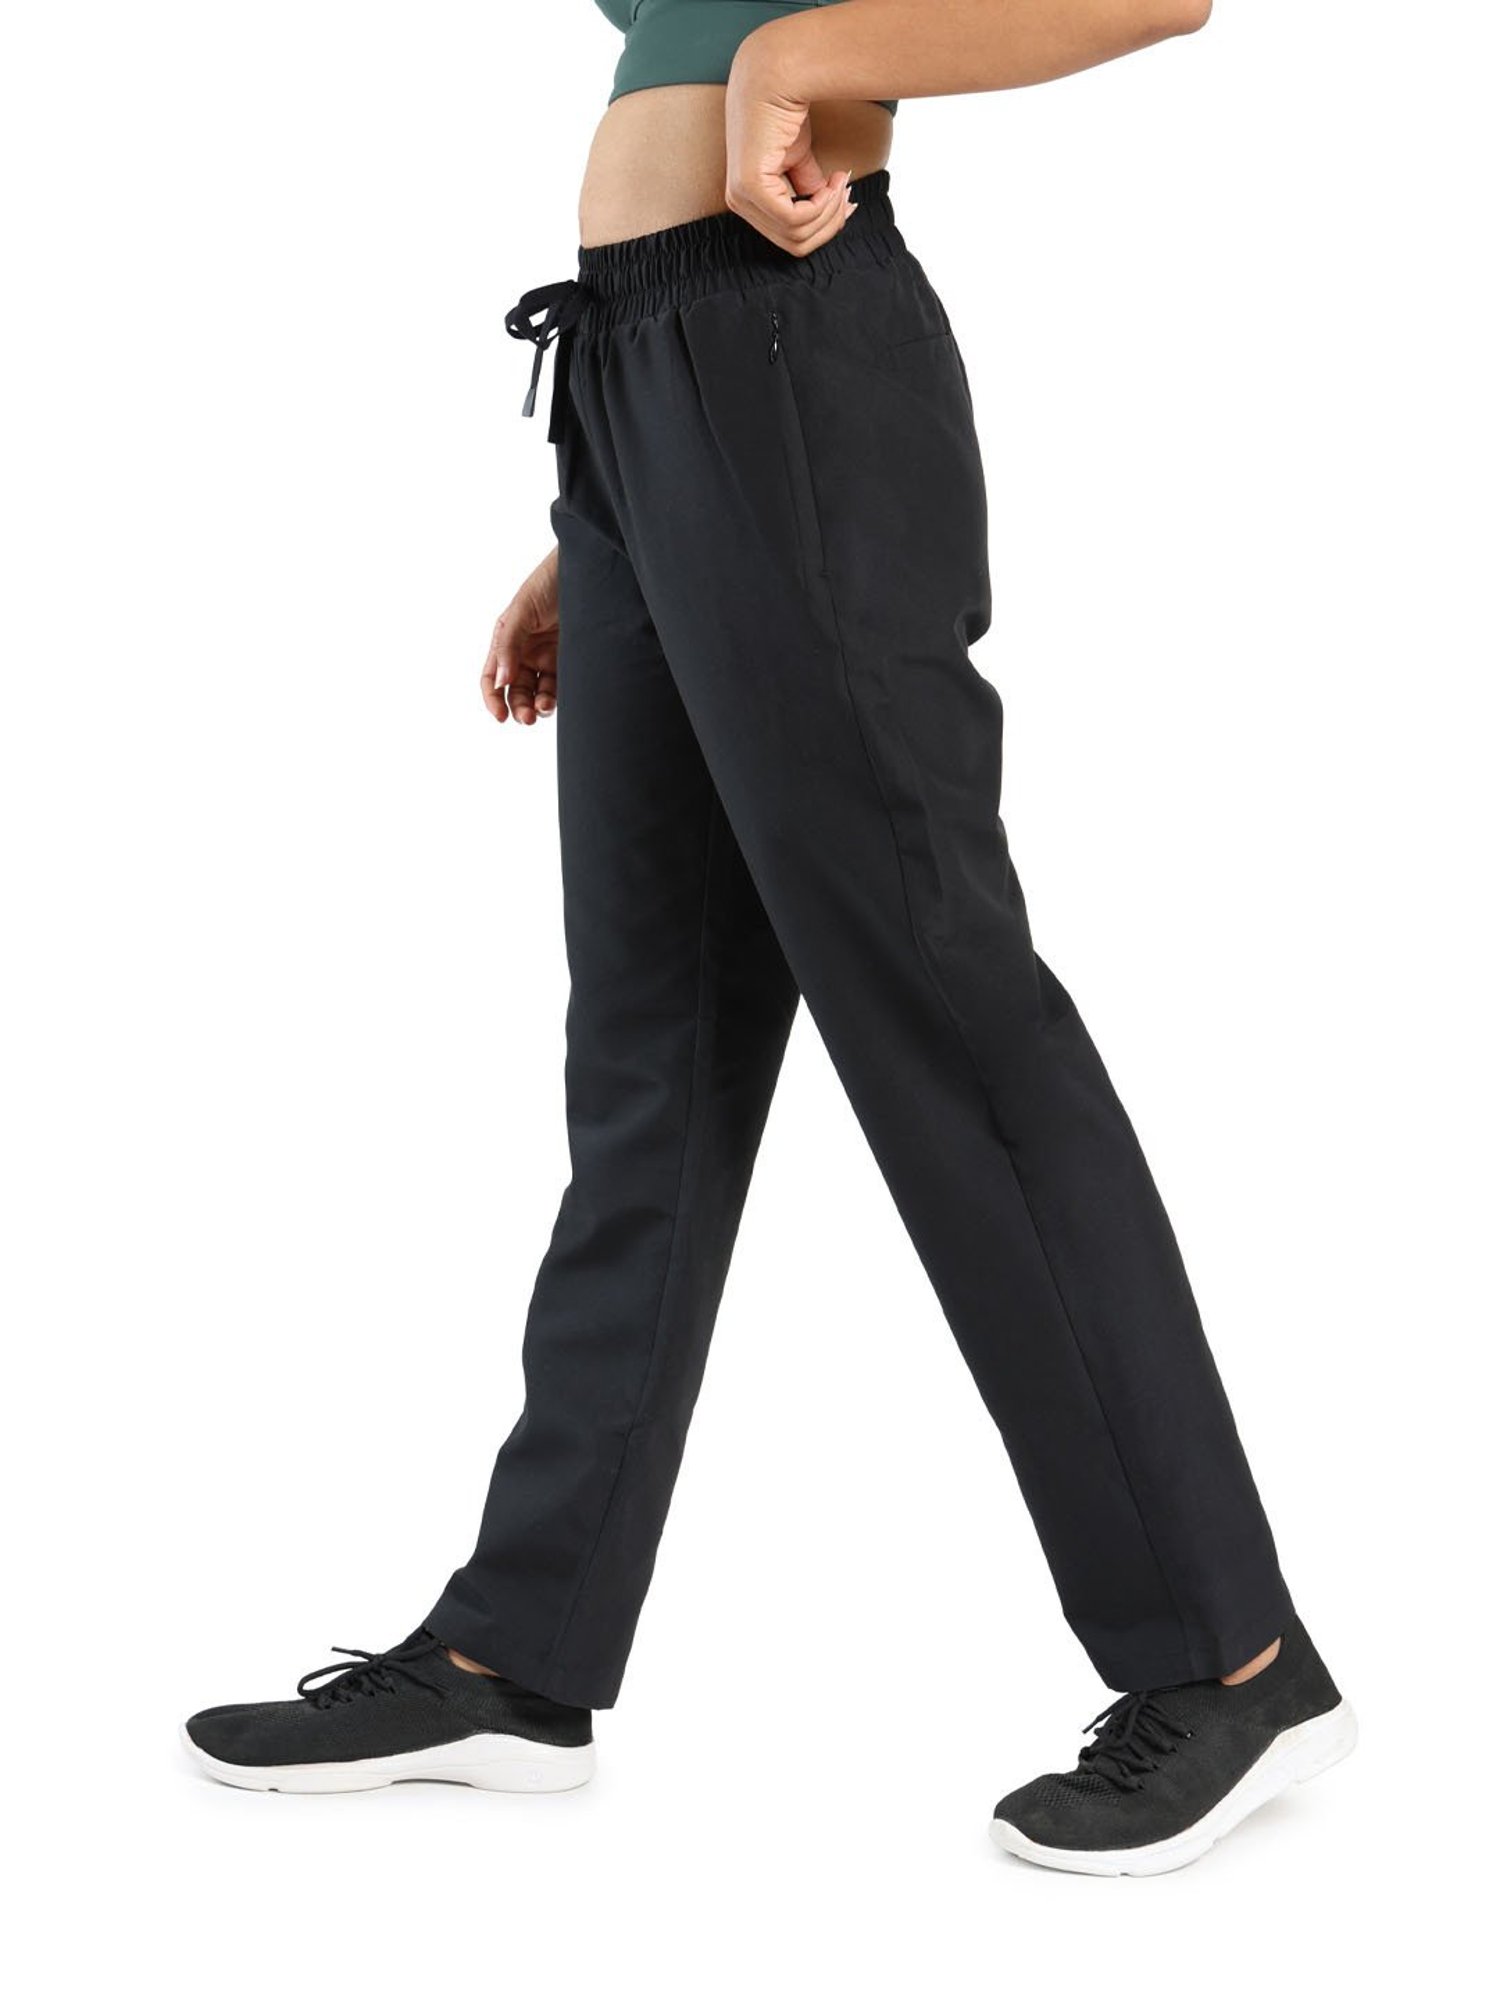 BlissClub Black Groove-In Cotton Flare Pants - Tall